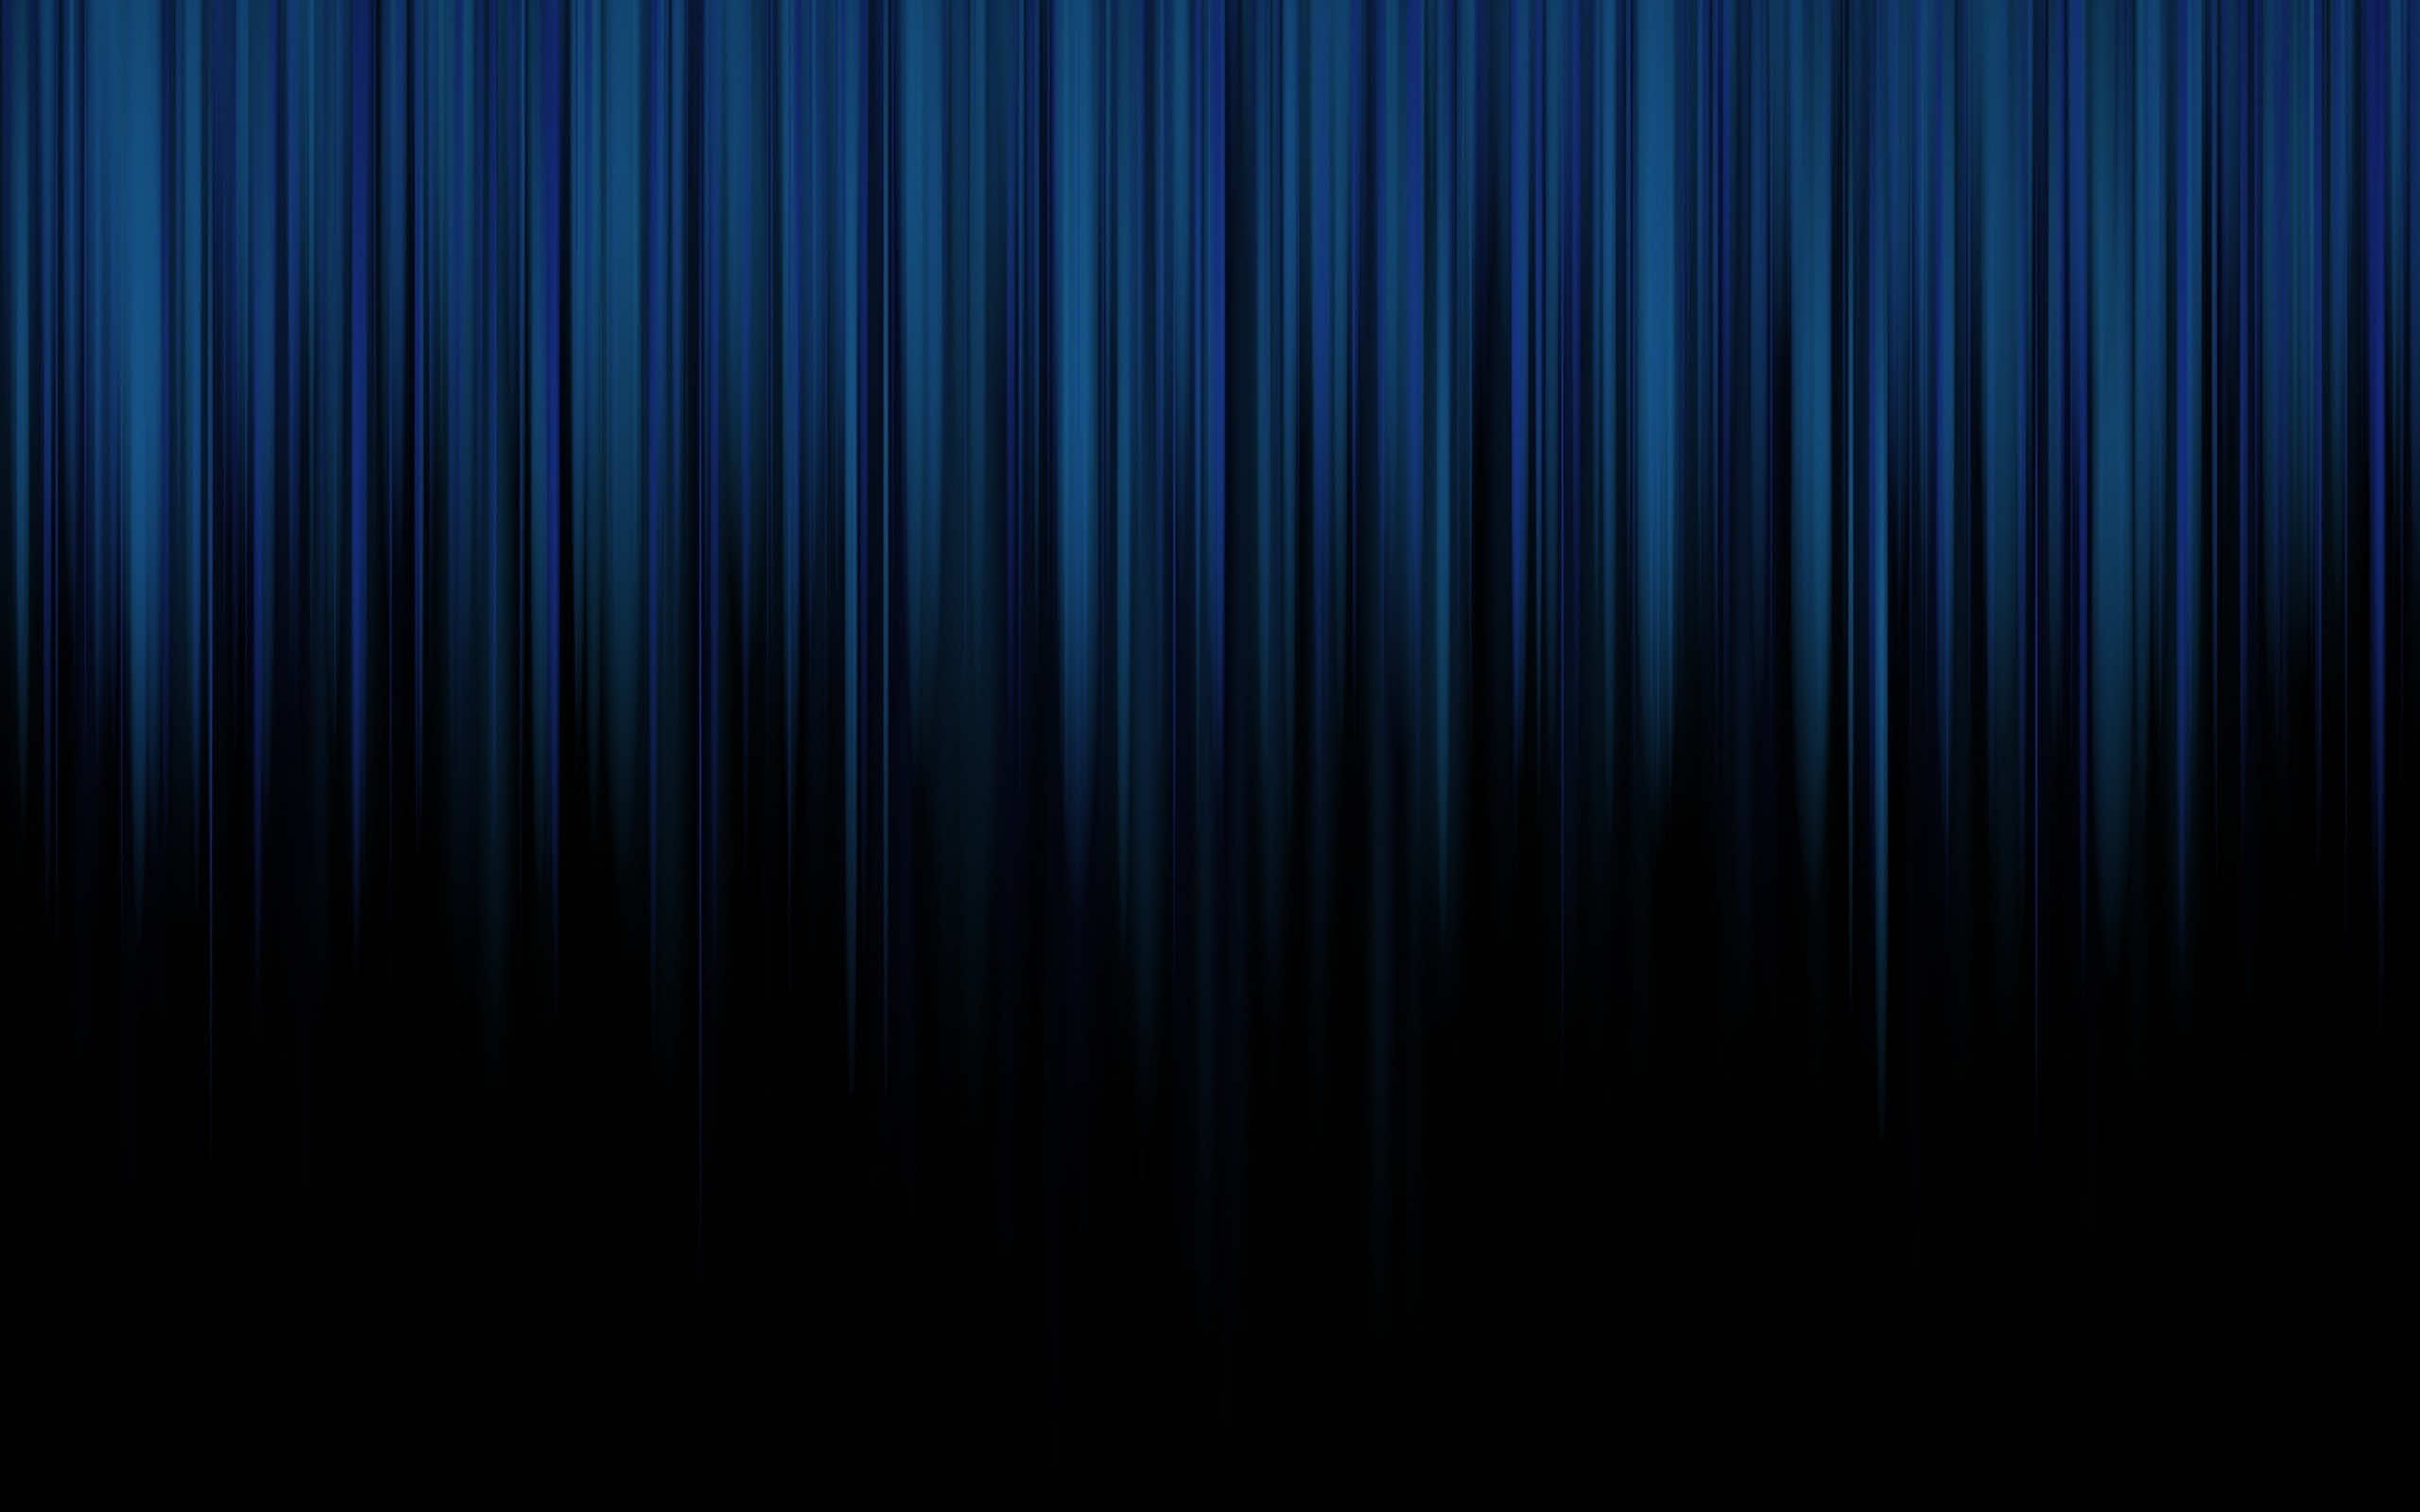 69 4K Blue Wallpaper Backgrounds That Will Give Your Desktop